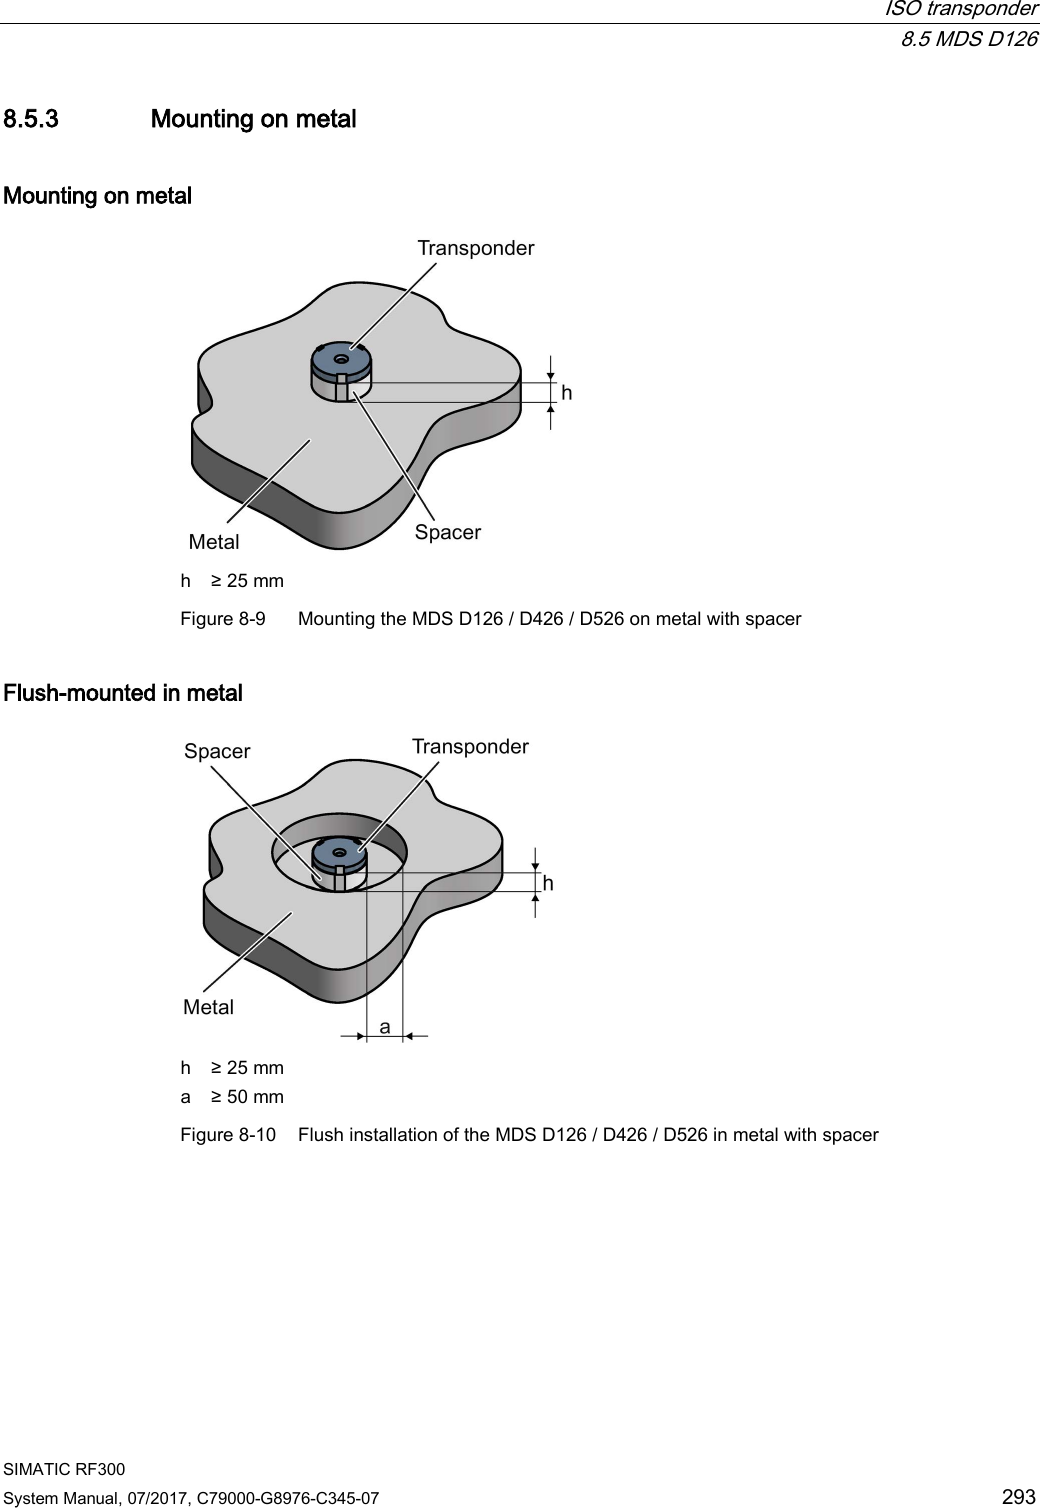  ISO transponder  8.5 MDS D126 SIMATIC RF300 System Manual, 07/2017, C79000-G8976-C345-07 293 8.5.3 Mounting on metal Mounting on metal  h ≥ 25 mm Figure 8-9  Mounting the MDS D126 / D426 / D526 on metal with spacer Flush-mounted in metal  h ≥ 25 mm a ≥ 50 mm Figure 8-10 Flush installation of the MDS D126 / D426 / D526 in metal with spacer 